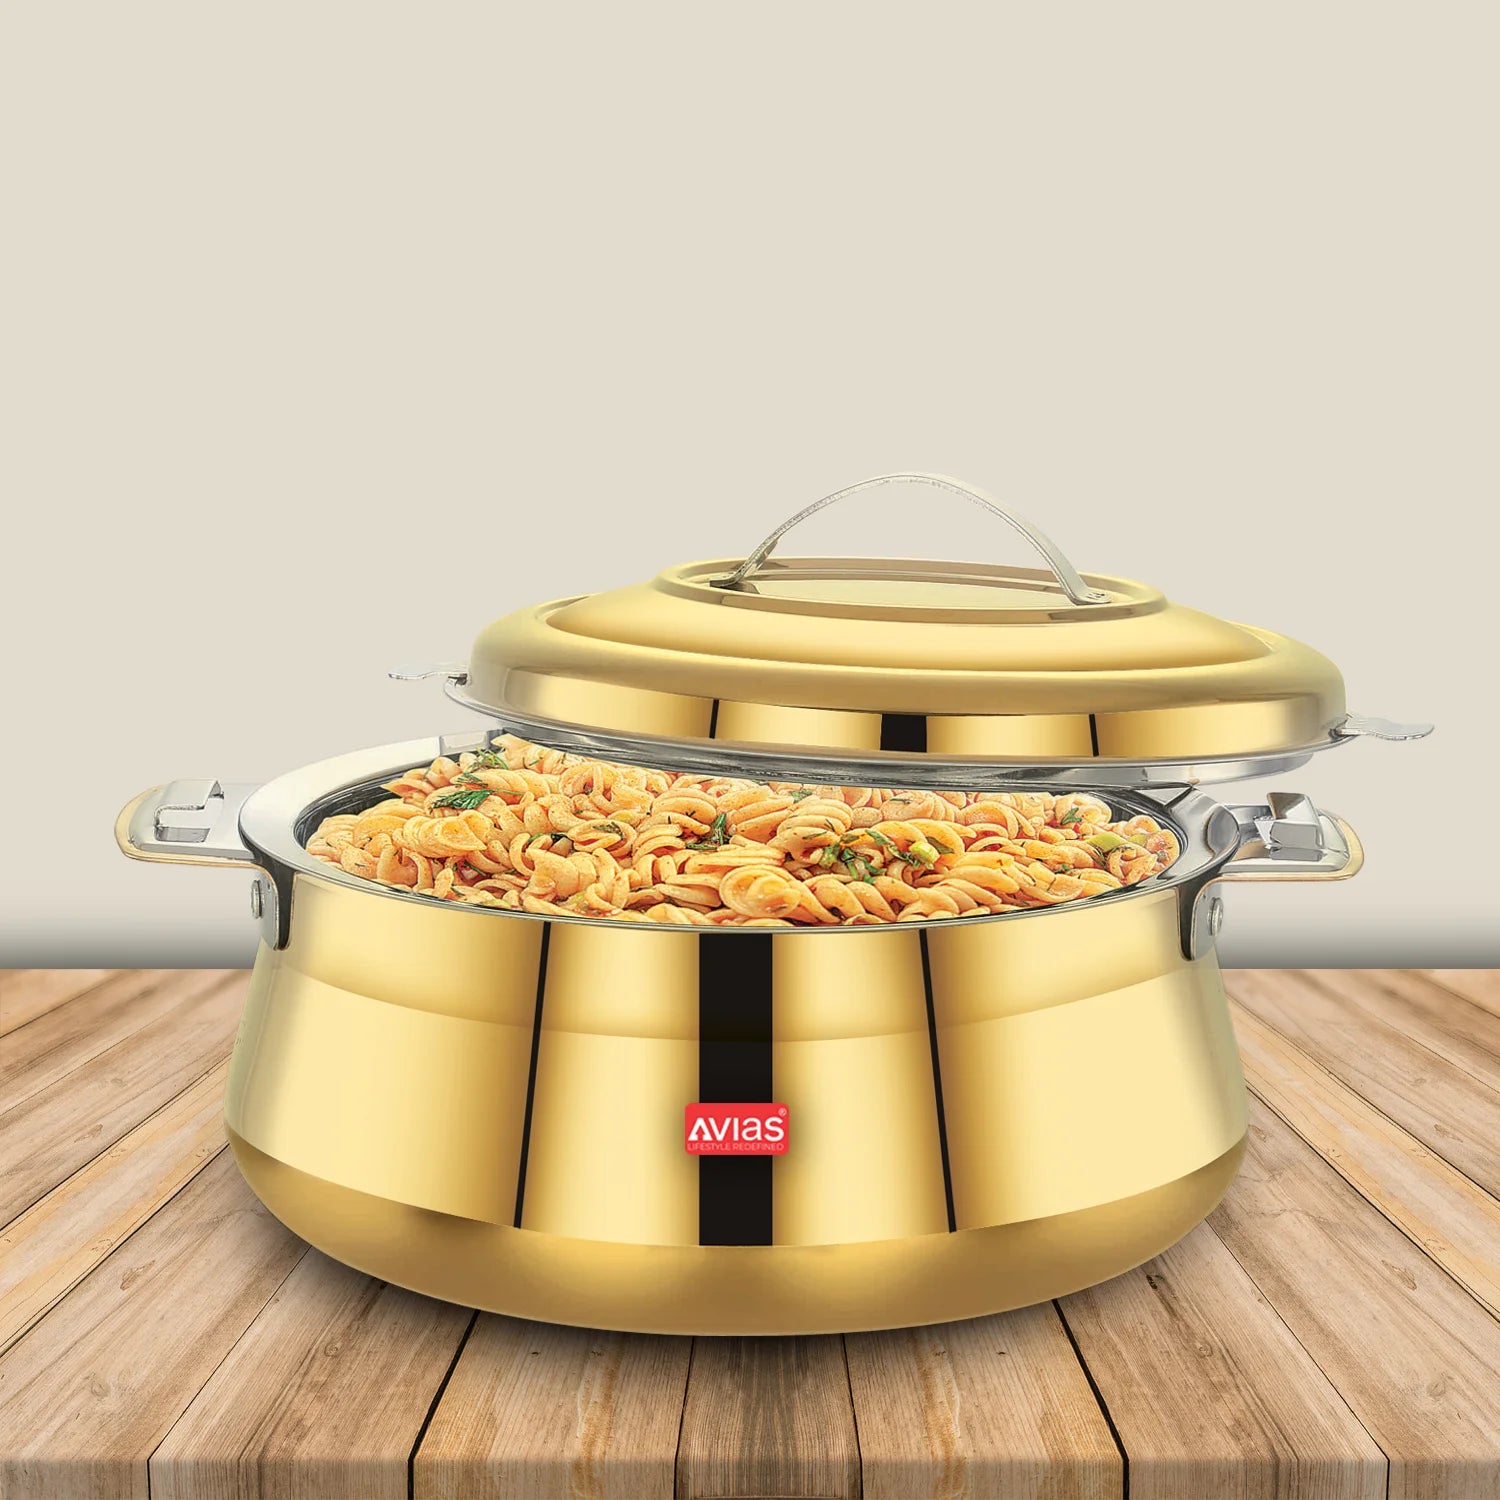 ANCHOR Stainless steel Hot Pot 3.5 LTR Serve Casserole Price in